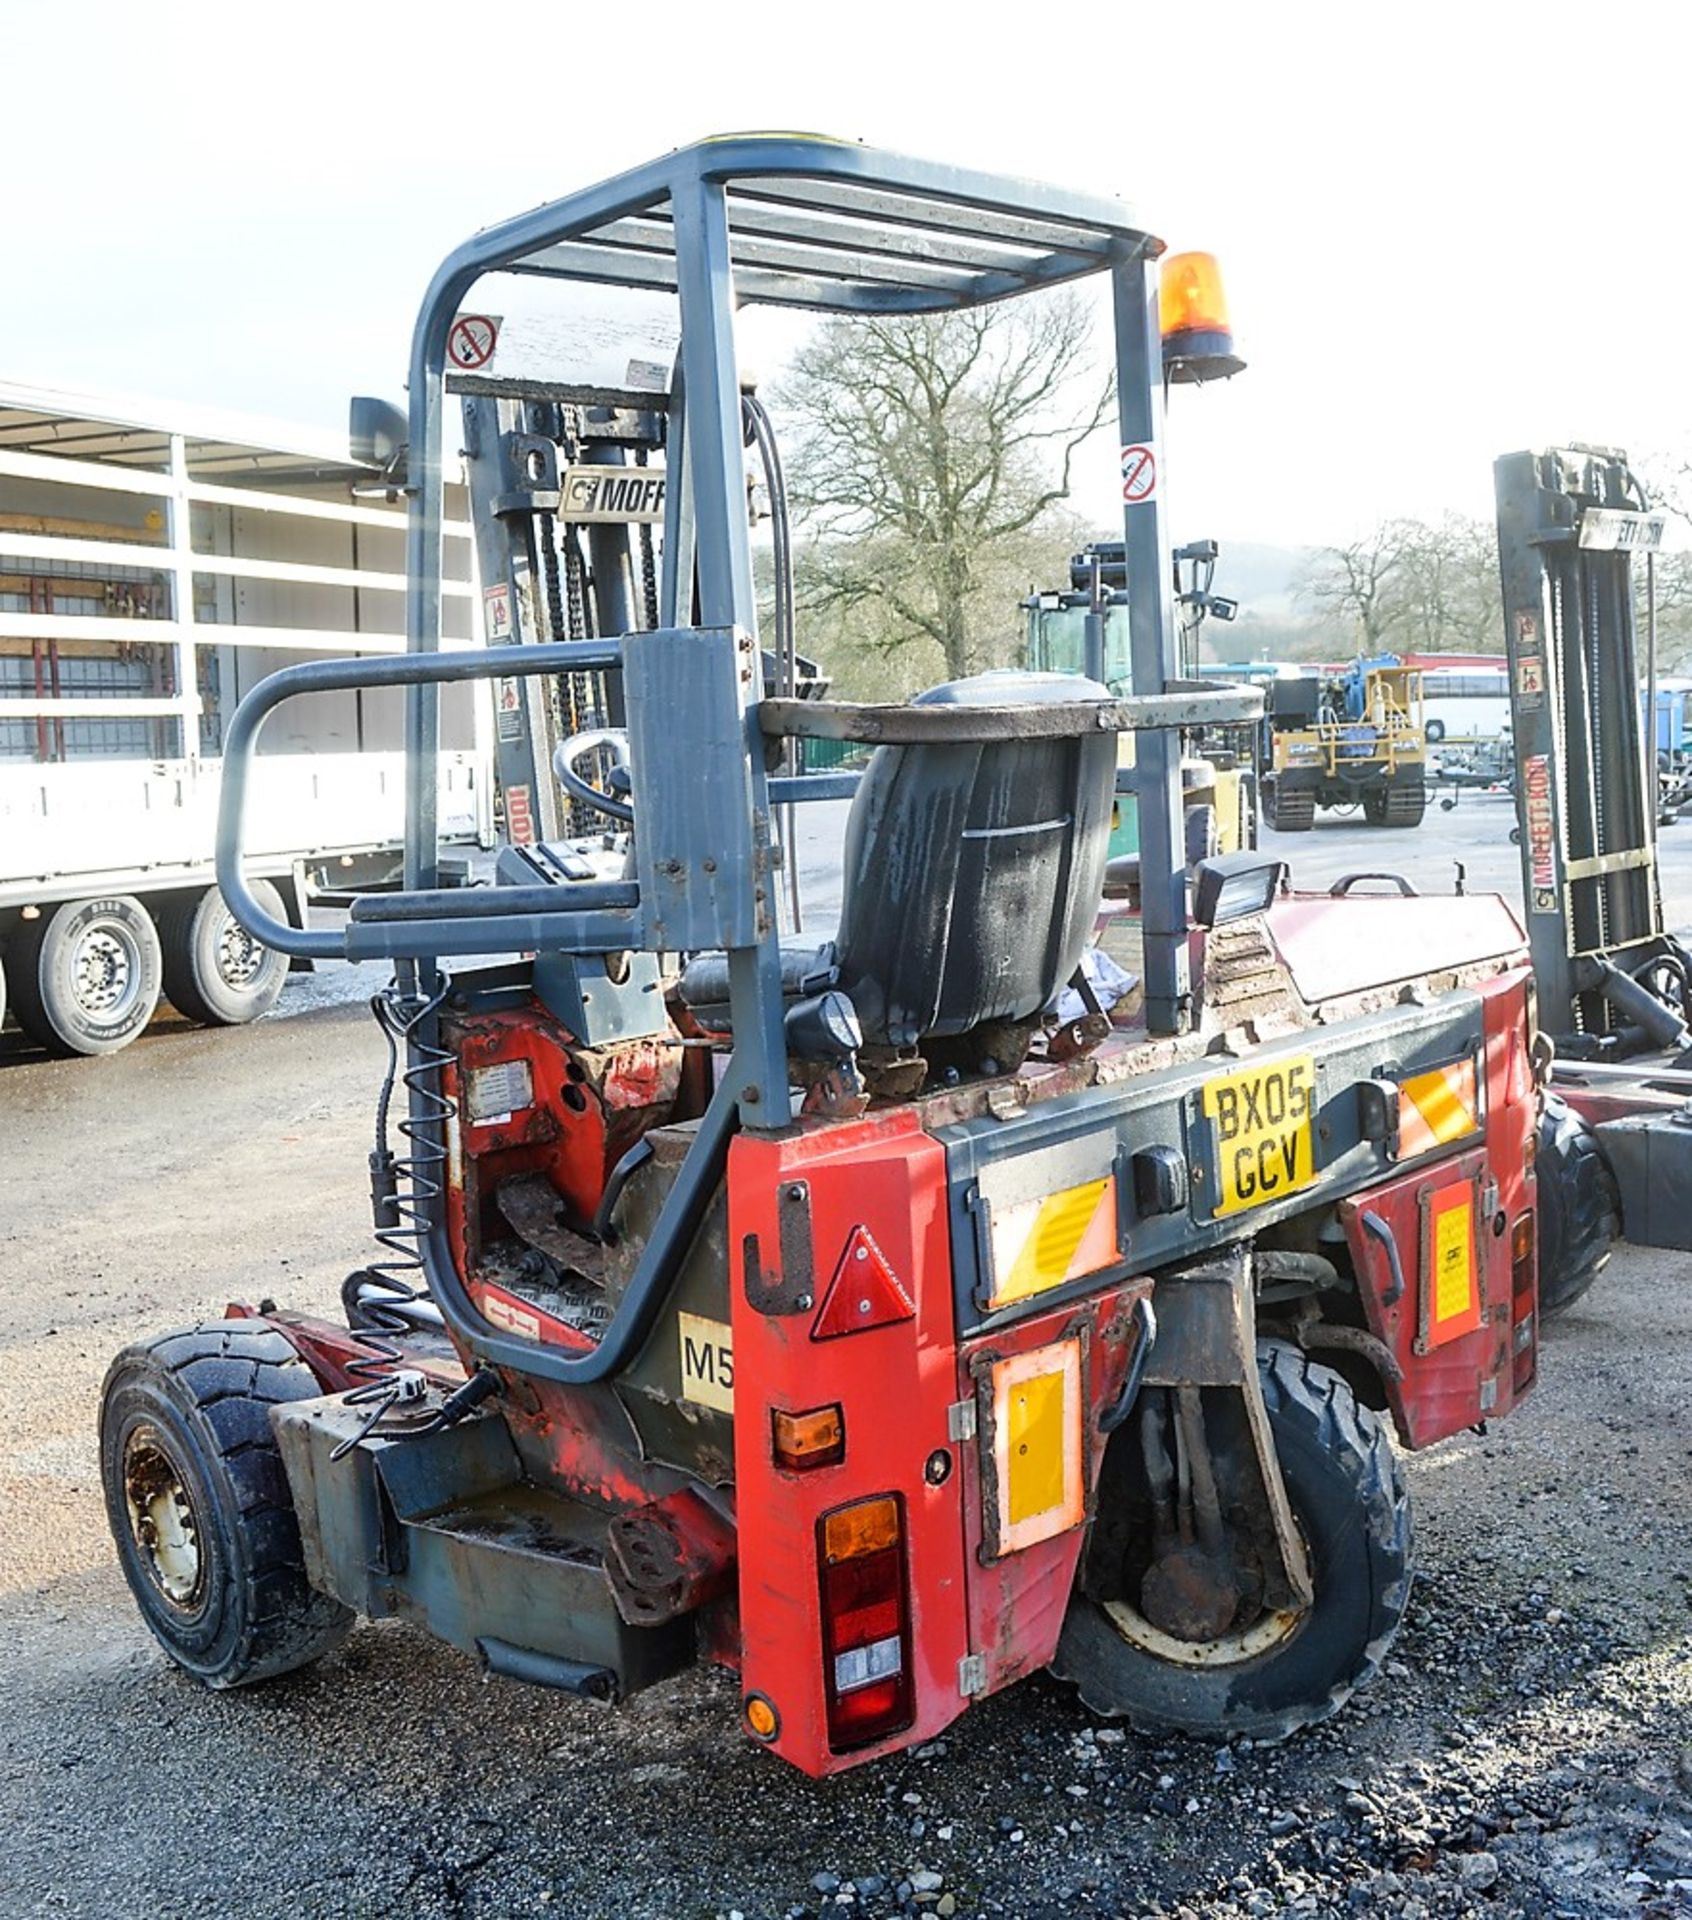 Moffet M5 20.3 diesel driven truck mountable fork lift truck Year: 2005 S/N: E030205 Recorded Hours: - Image 3 of 6